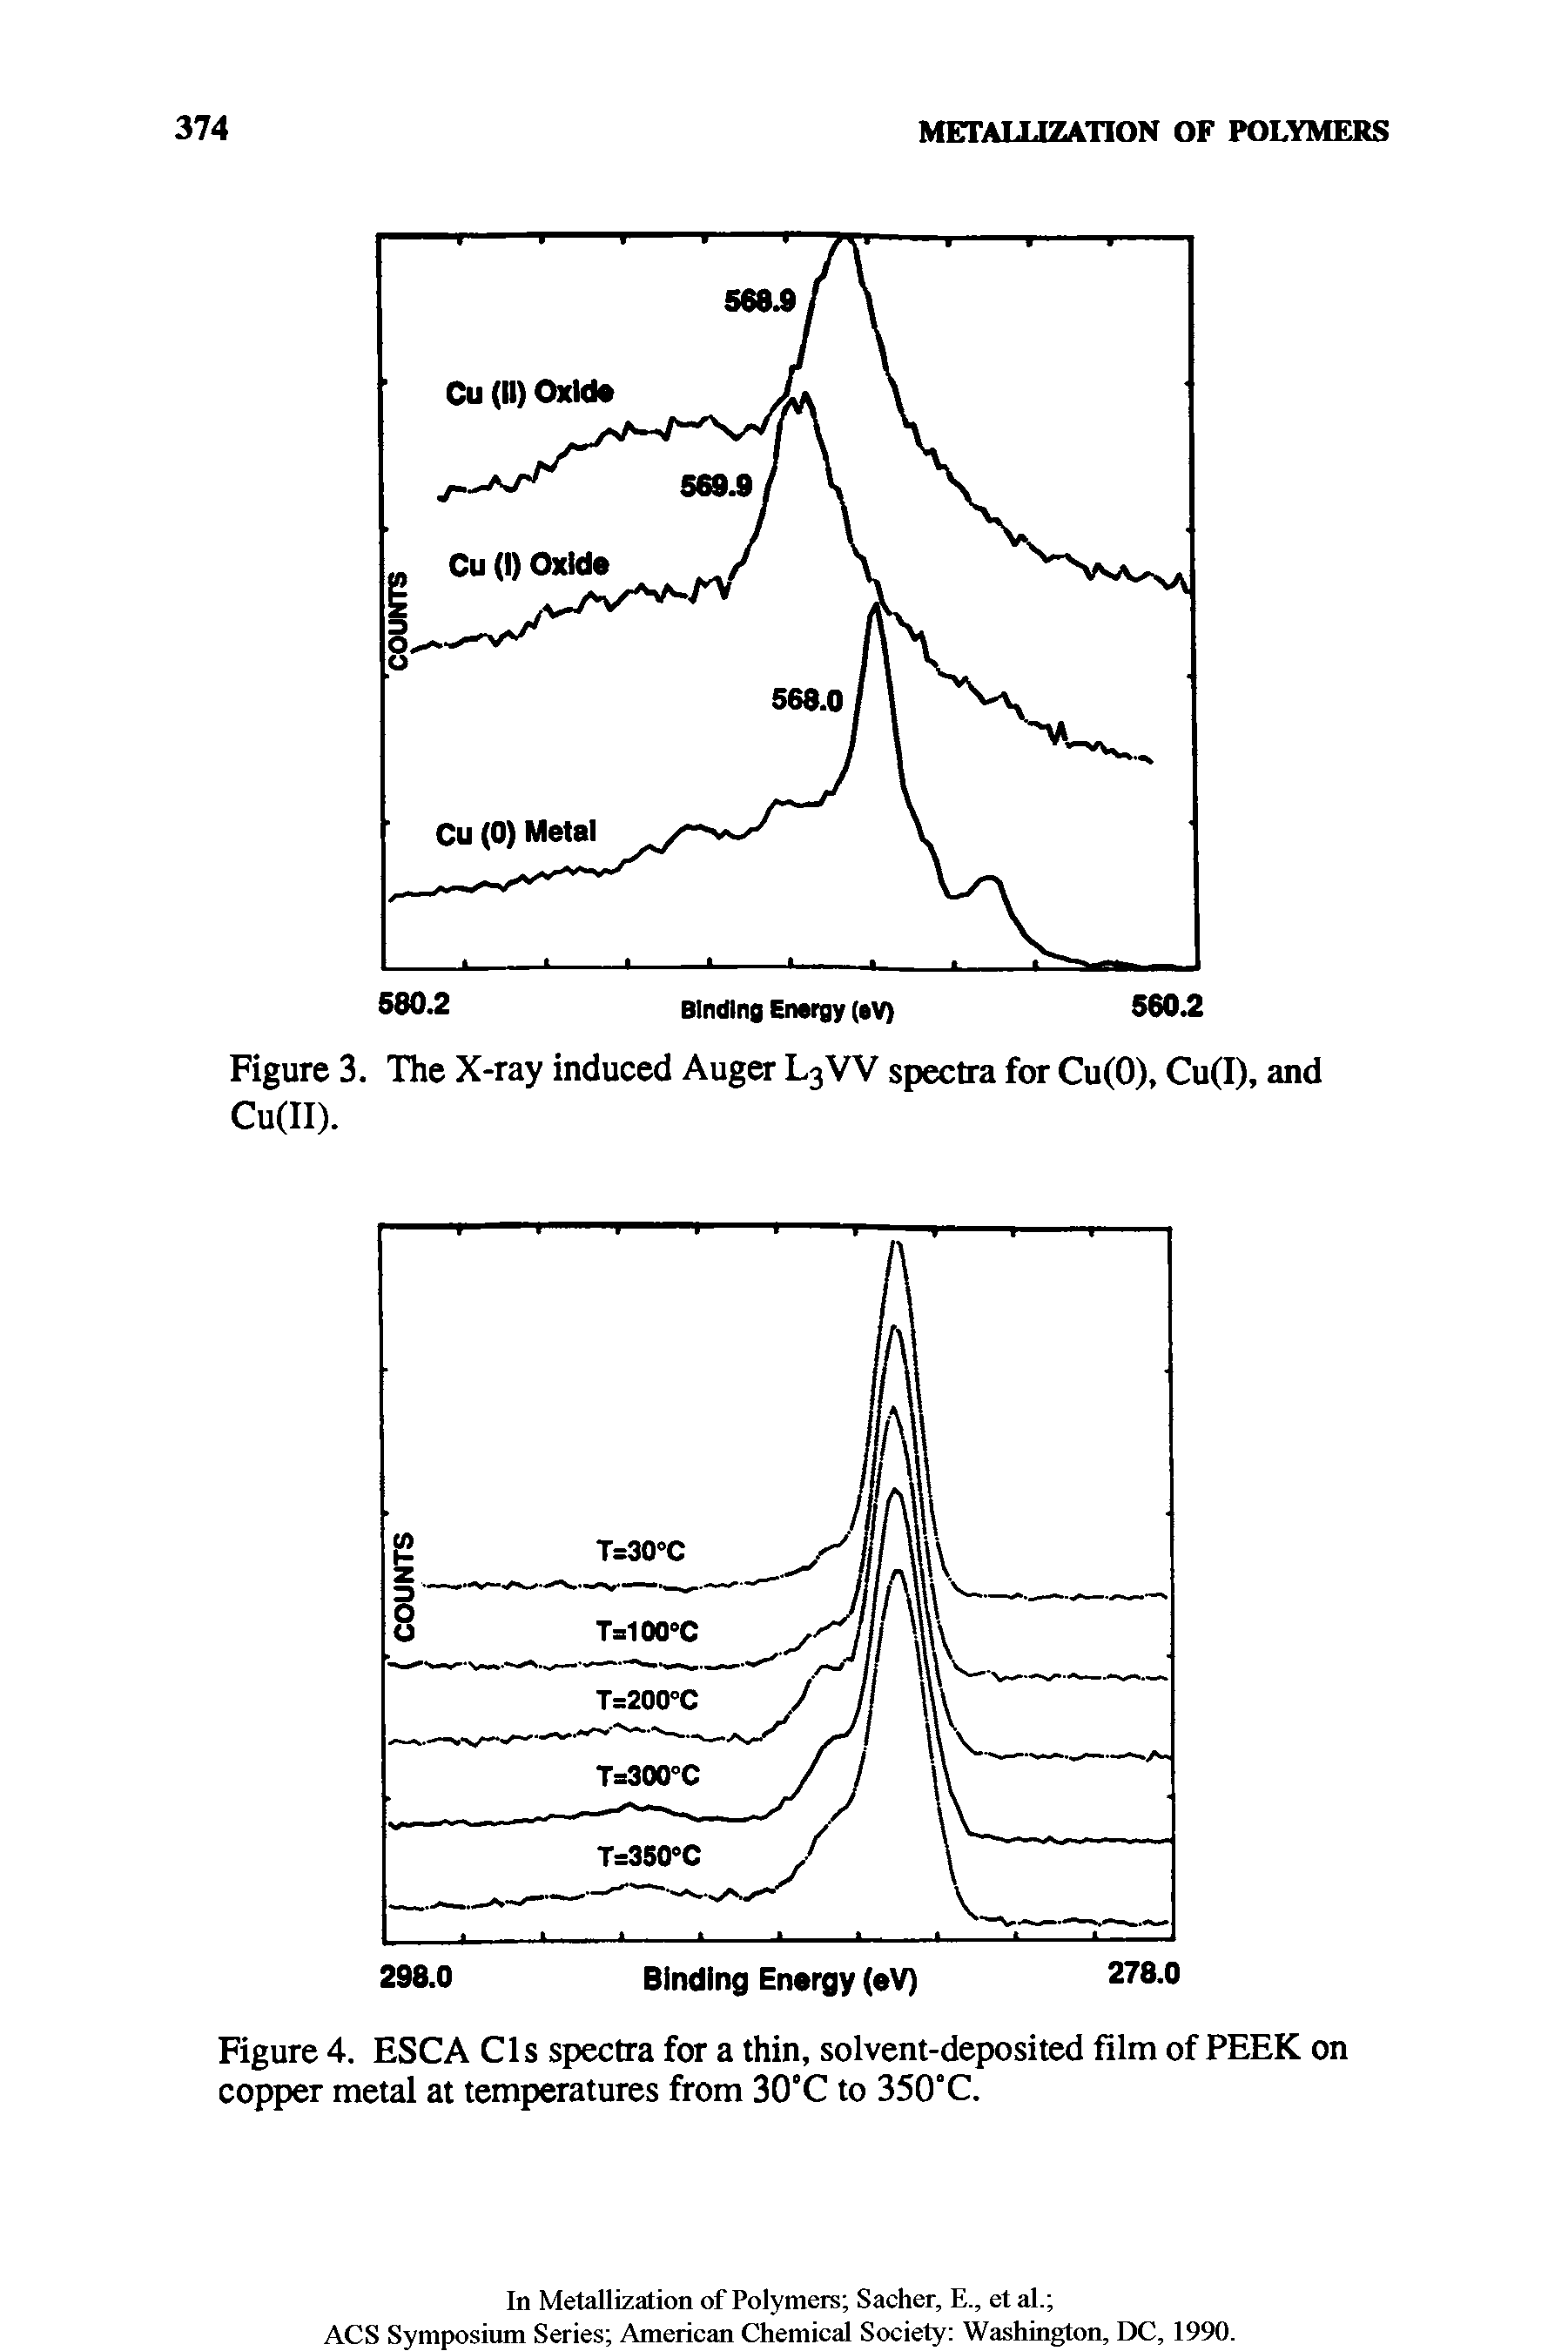 Figure 4. ESCA Cls spectra for a thin, solvent-deposited film of PEEK on copper metal at temperatures from 30°C to 350°C.